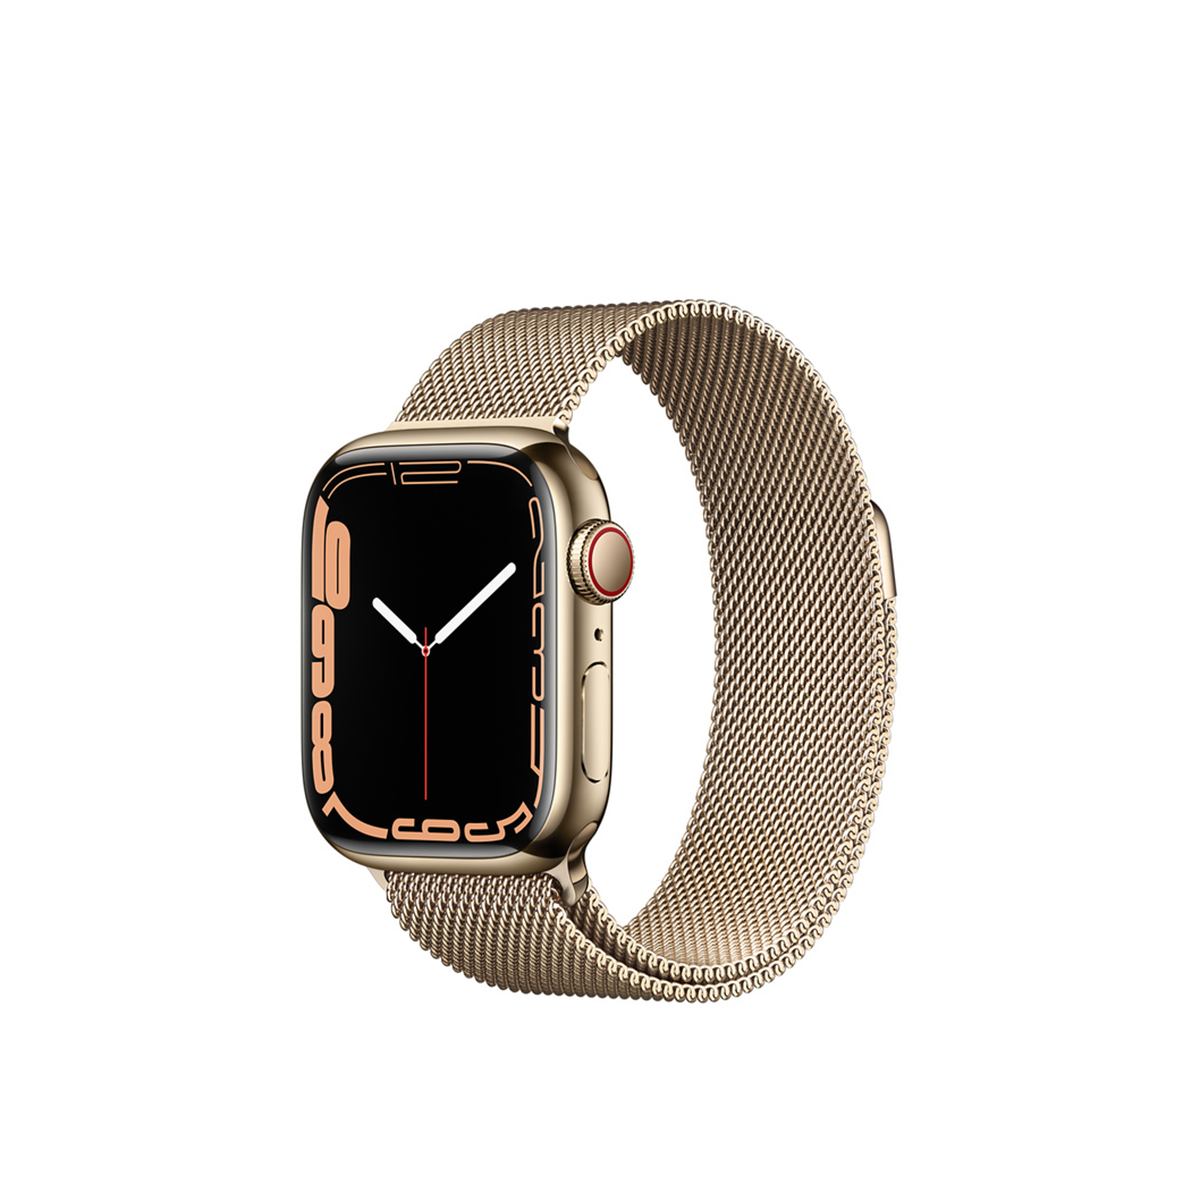  Apple Watch Series 7 GPS + Cellular, Gold Stainless Steel Case with Gold Milanese Loop 